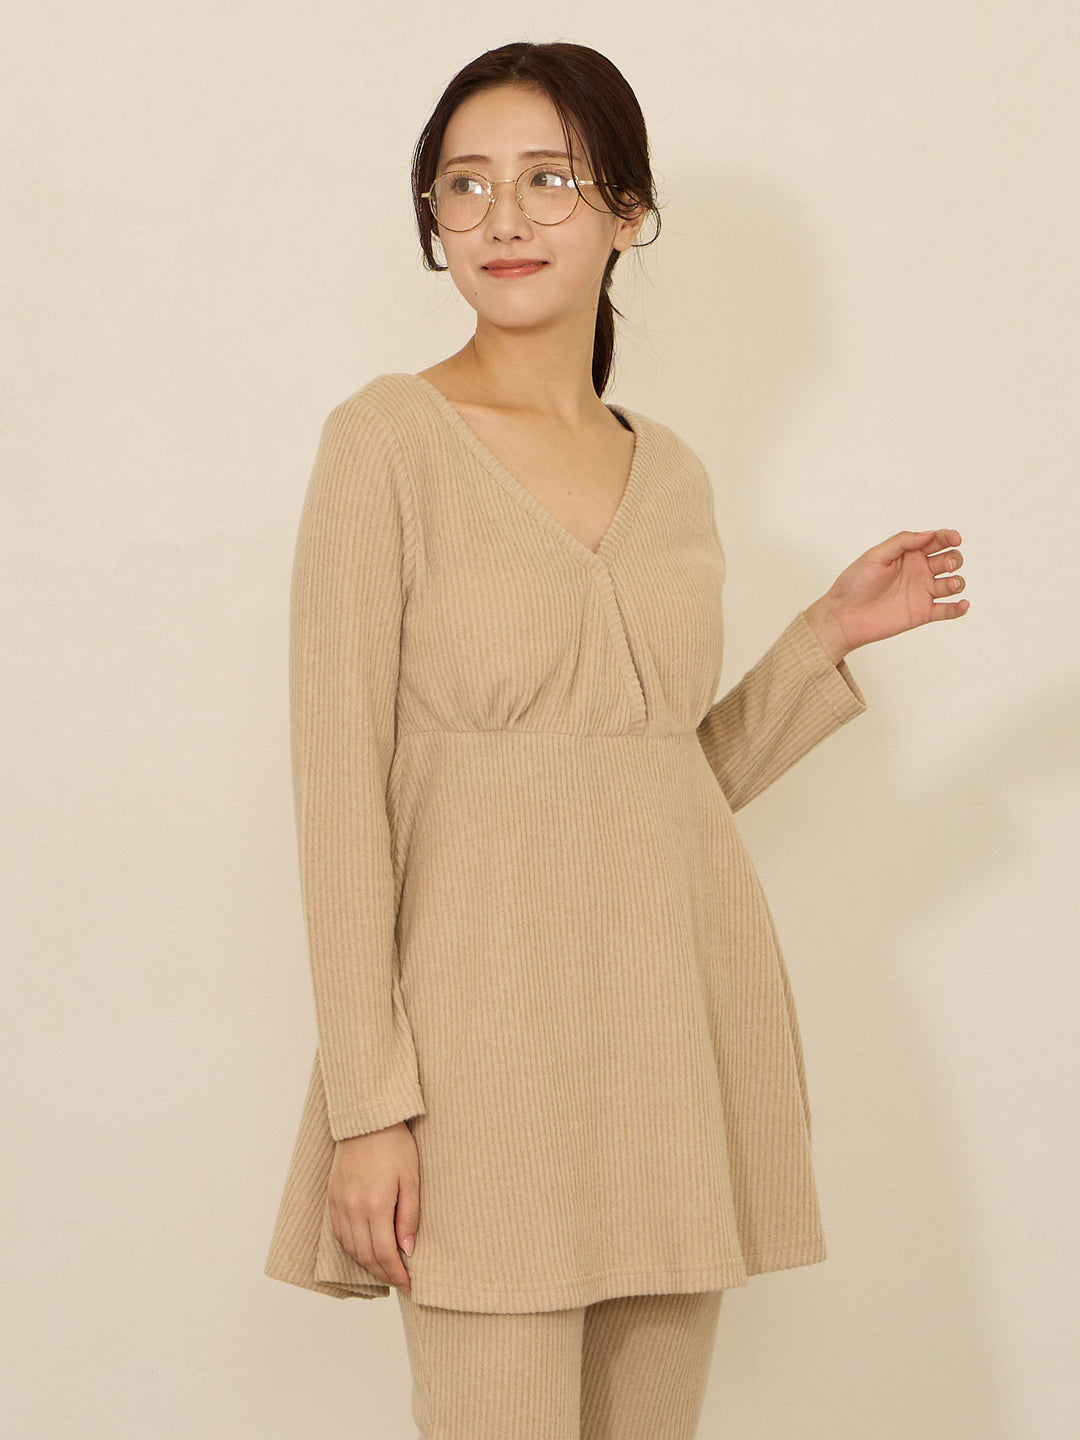 [Maternity/Nursing Clothes] Room tops with cups that stay in place Beige